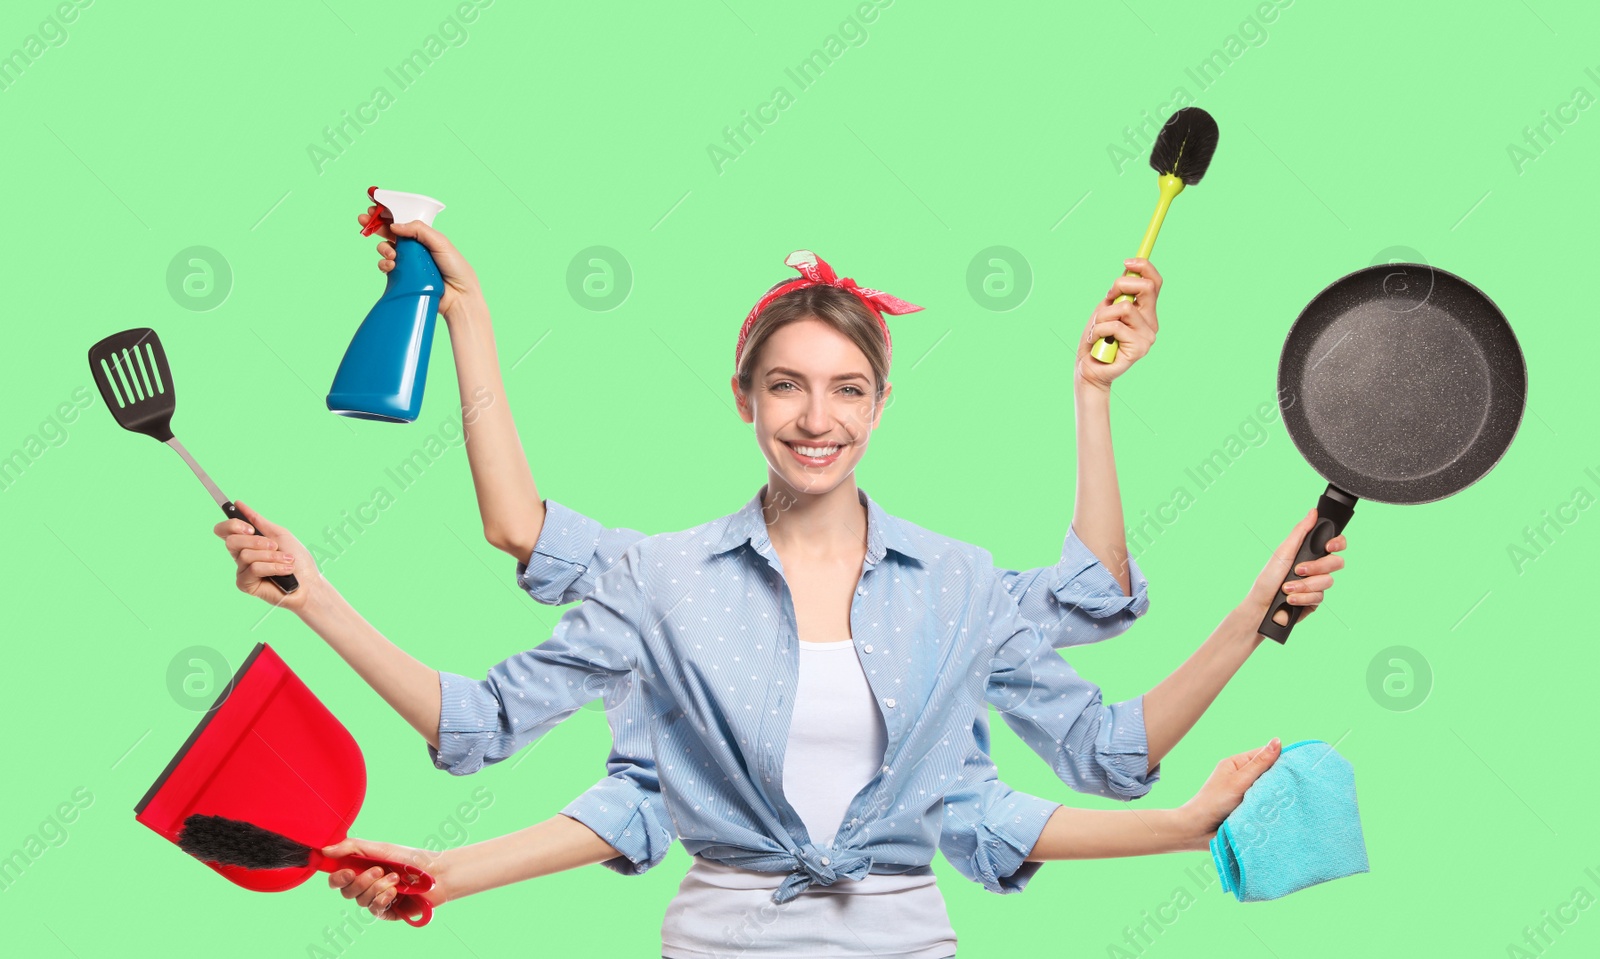 Image of Multitask housewife with many hands holding different stuff on green background